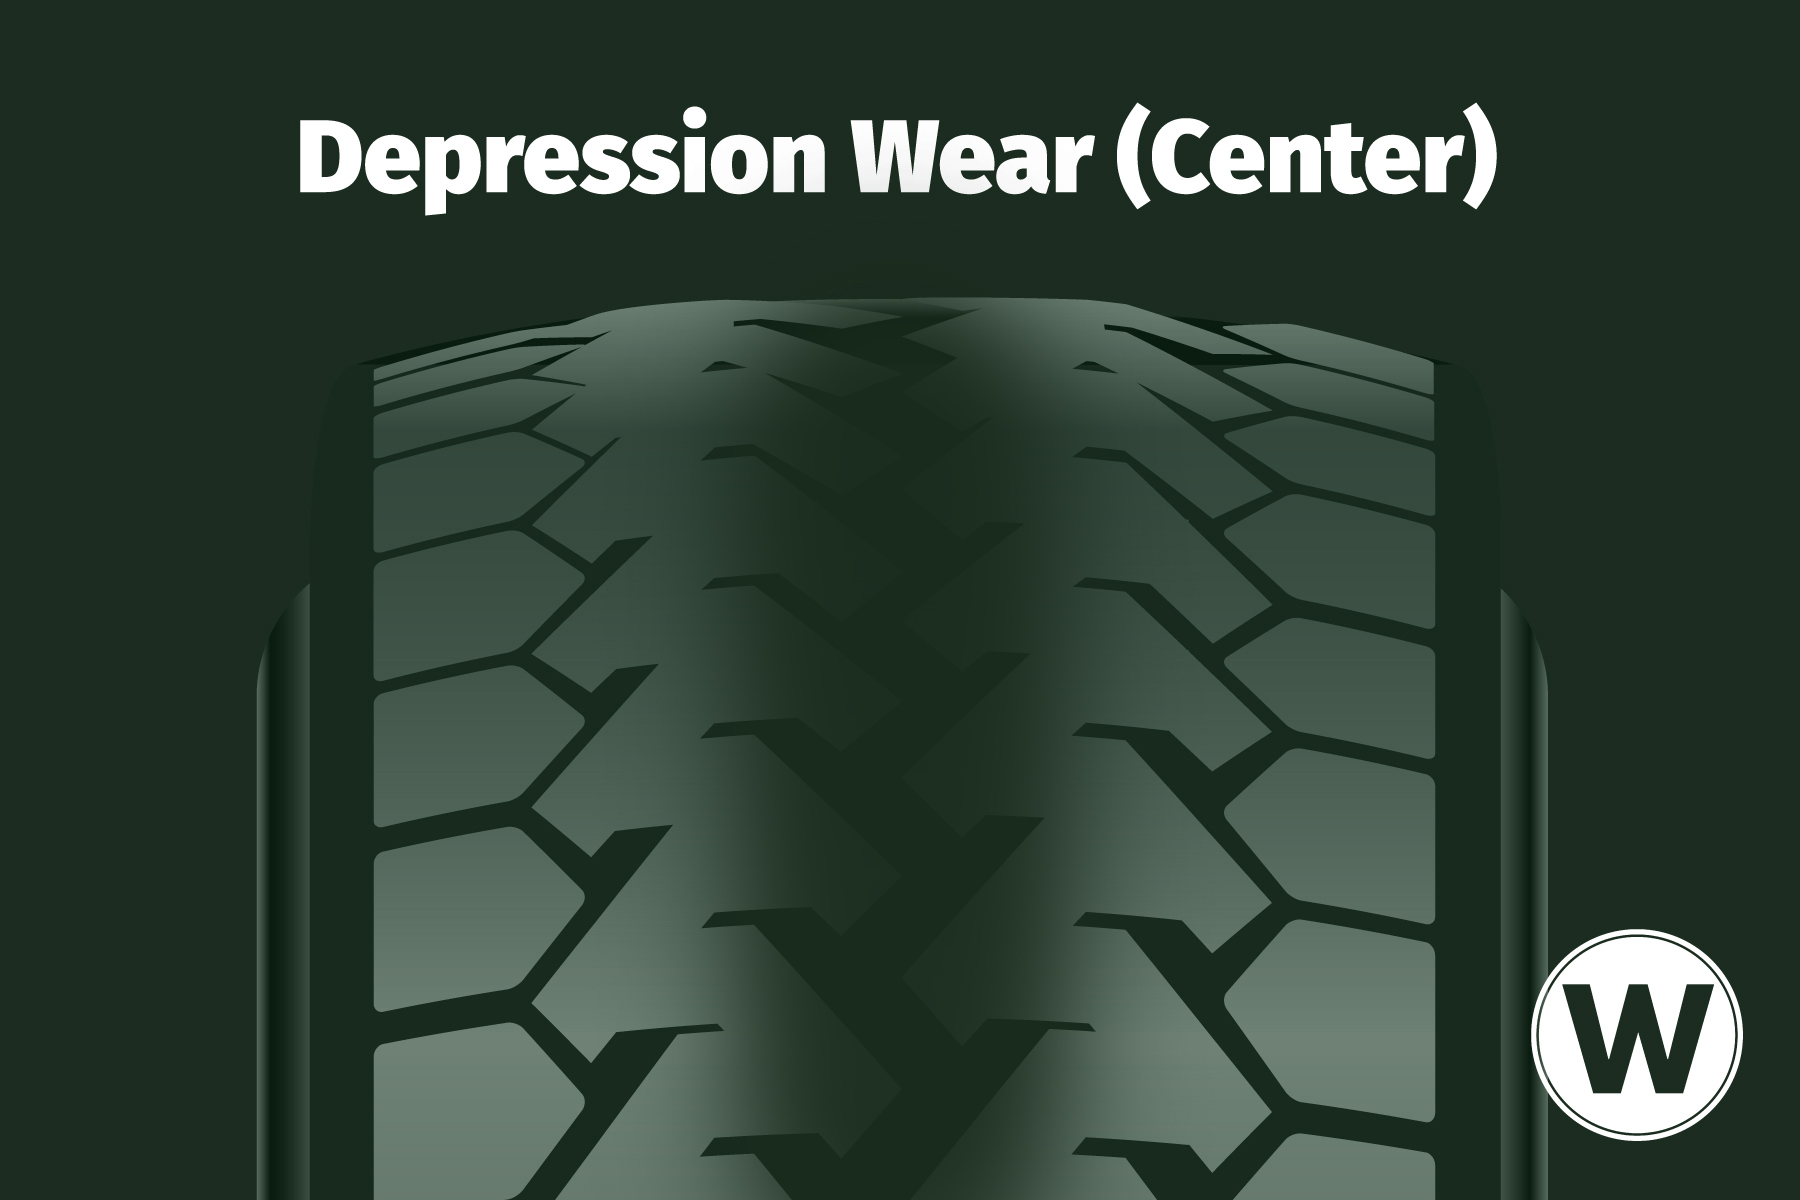 A wear pattern diagram that shows where to find depression wear (center) on your commercial steer tires.